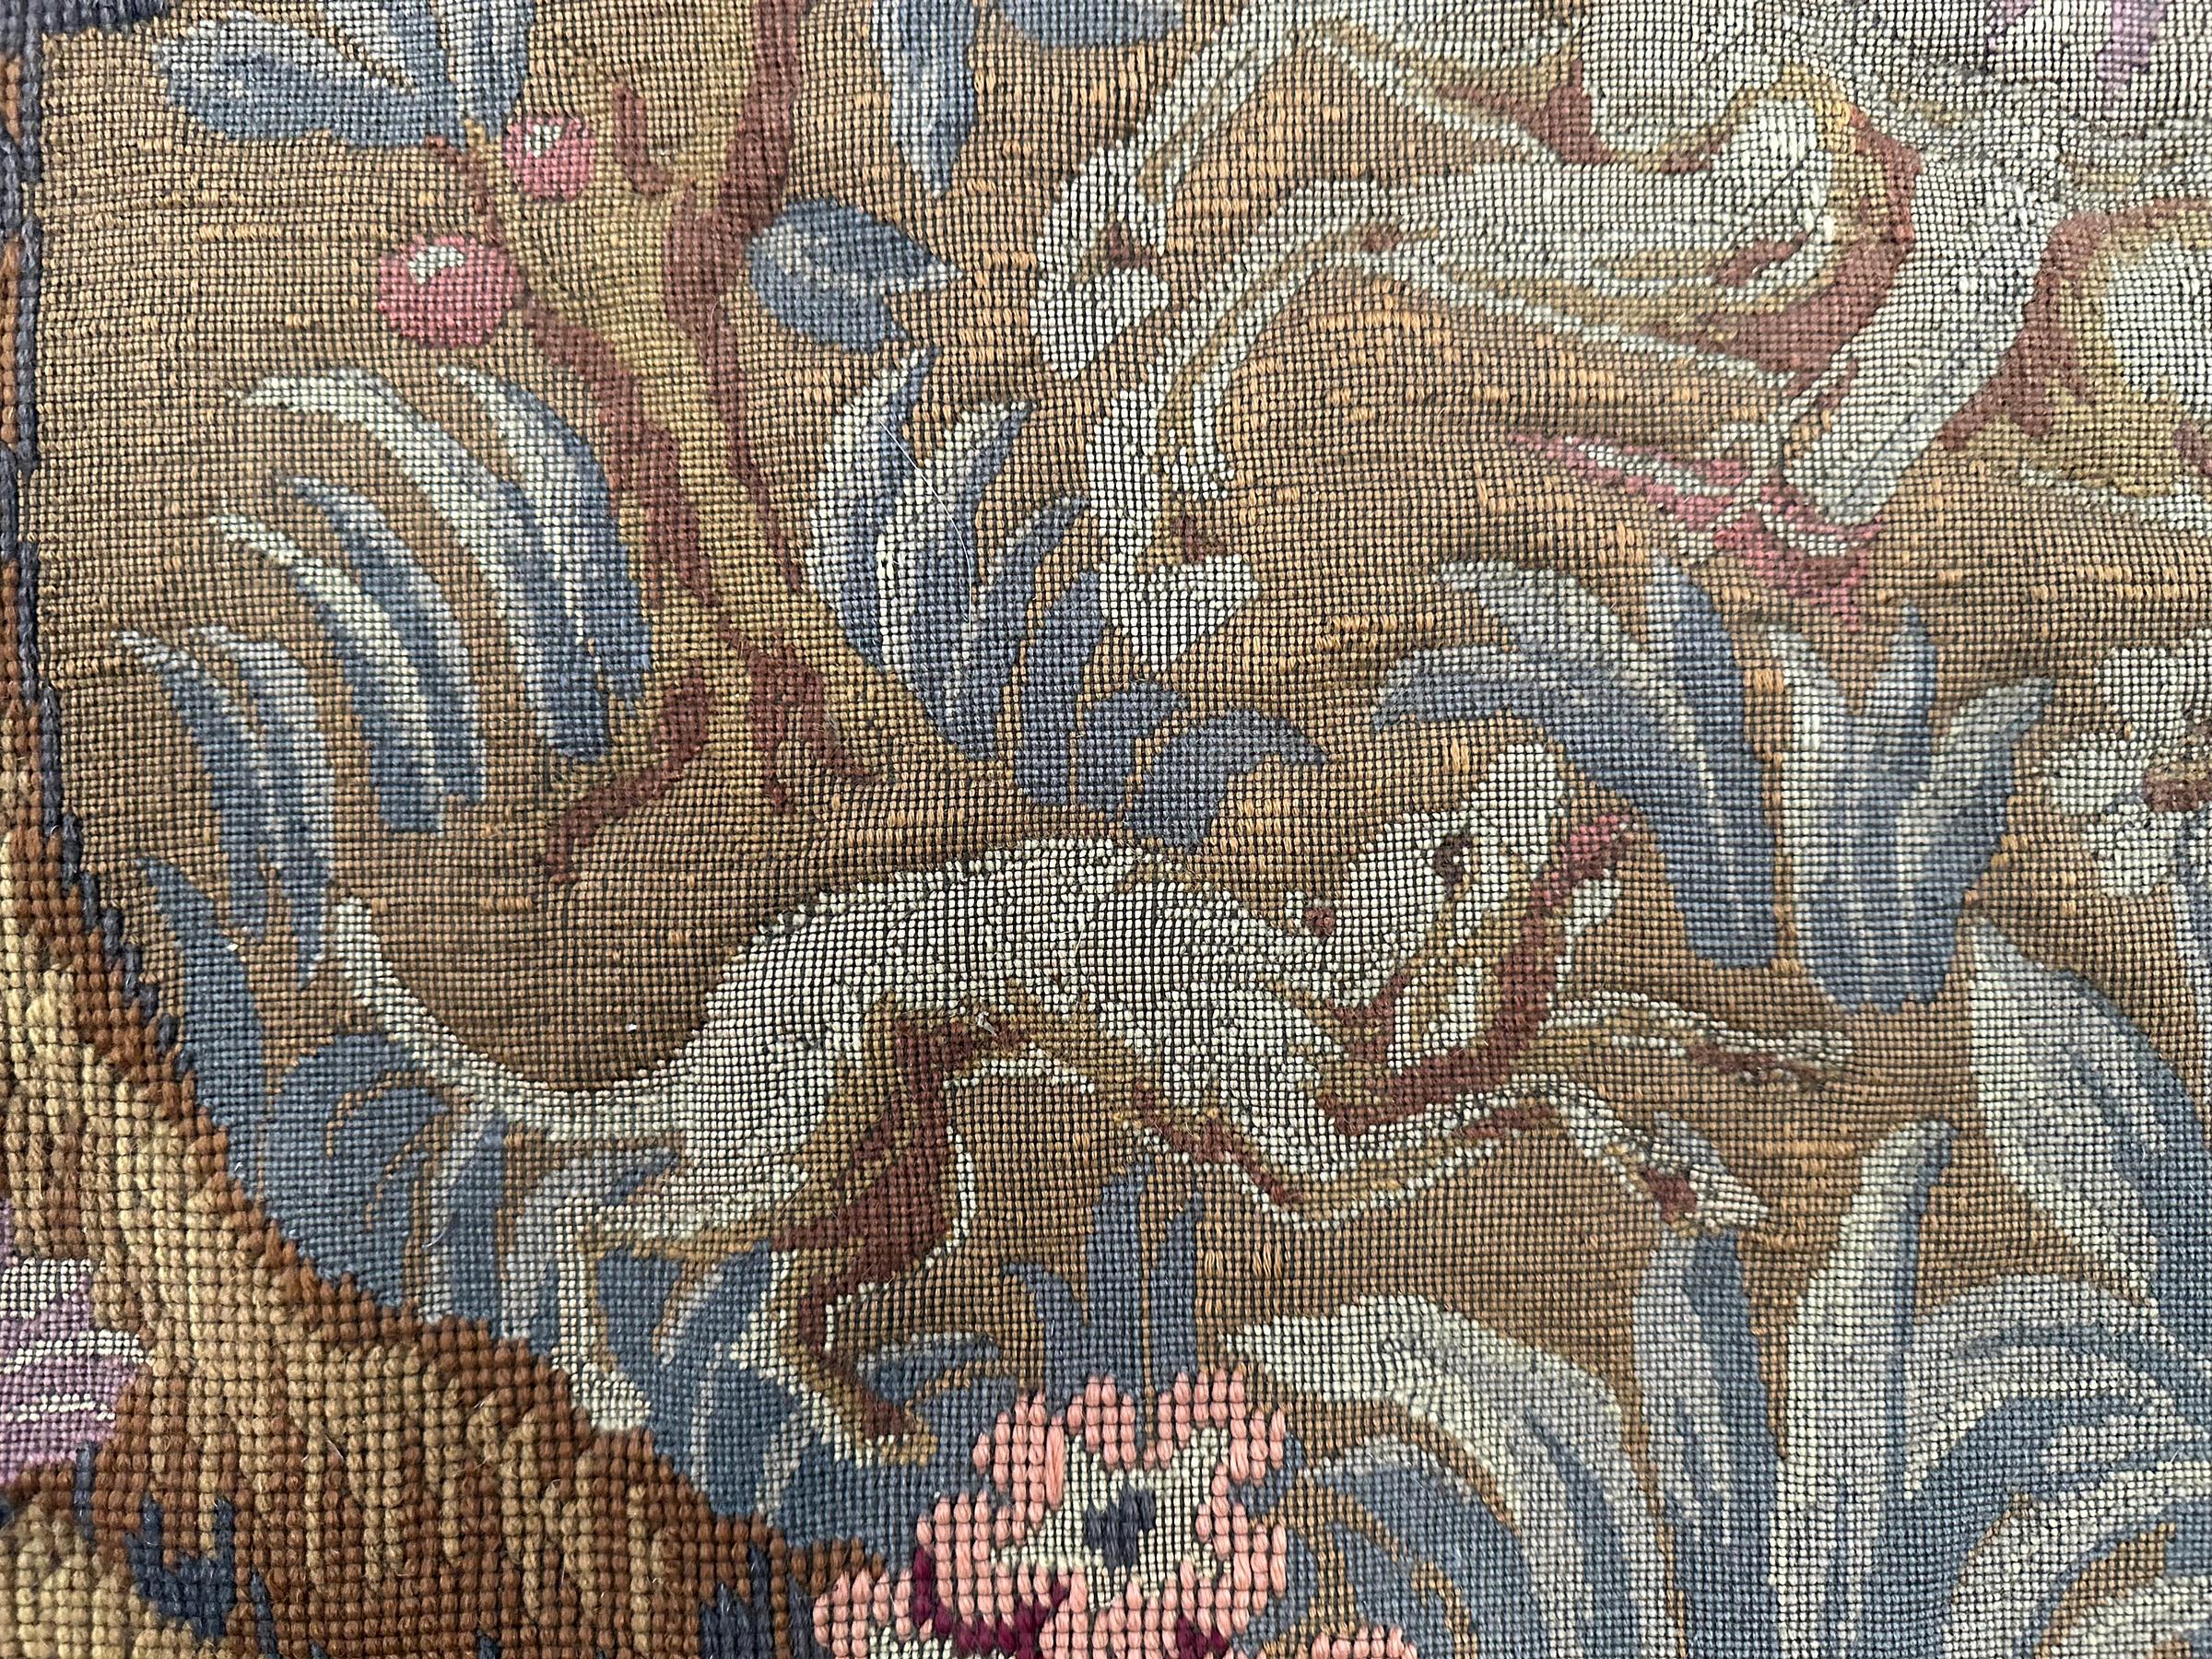 1920 Antique English Needlepoint Tapestry Wool & Silk 3x5 82cm x 158cm For Sale 3